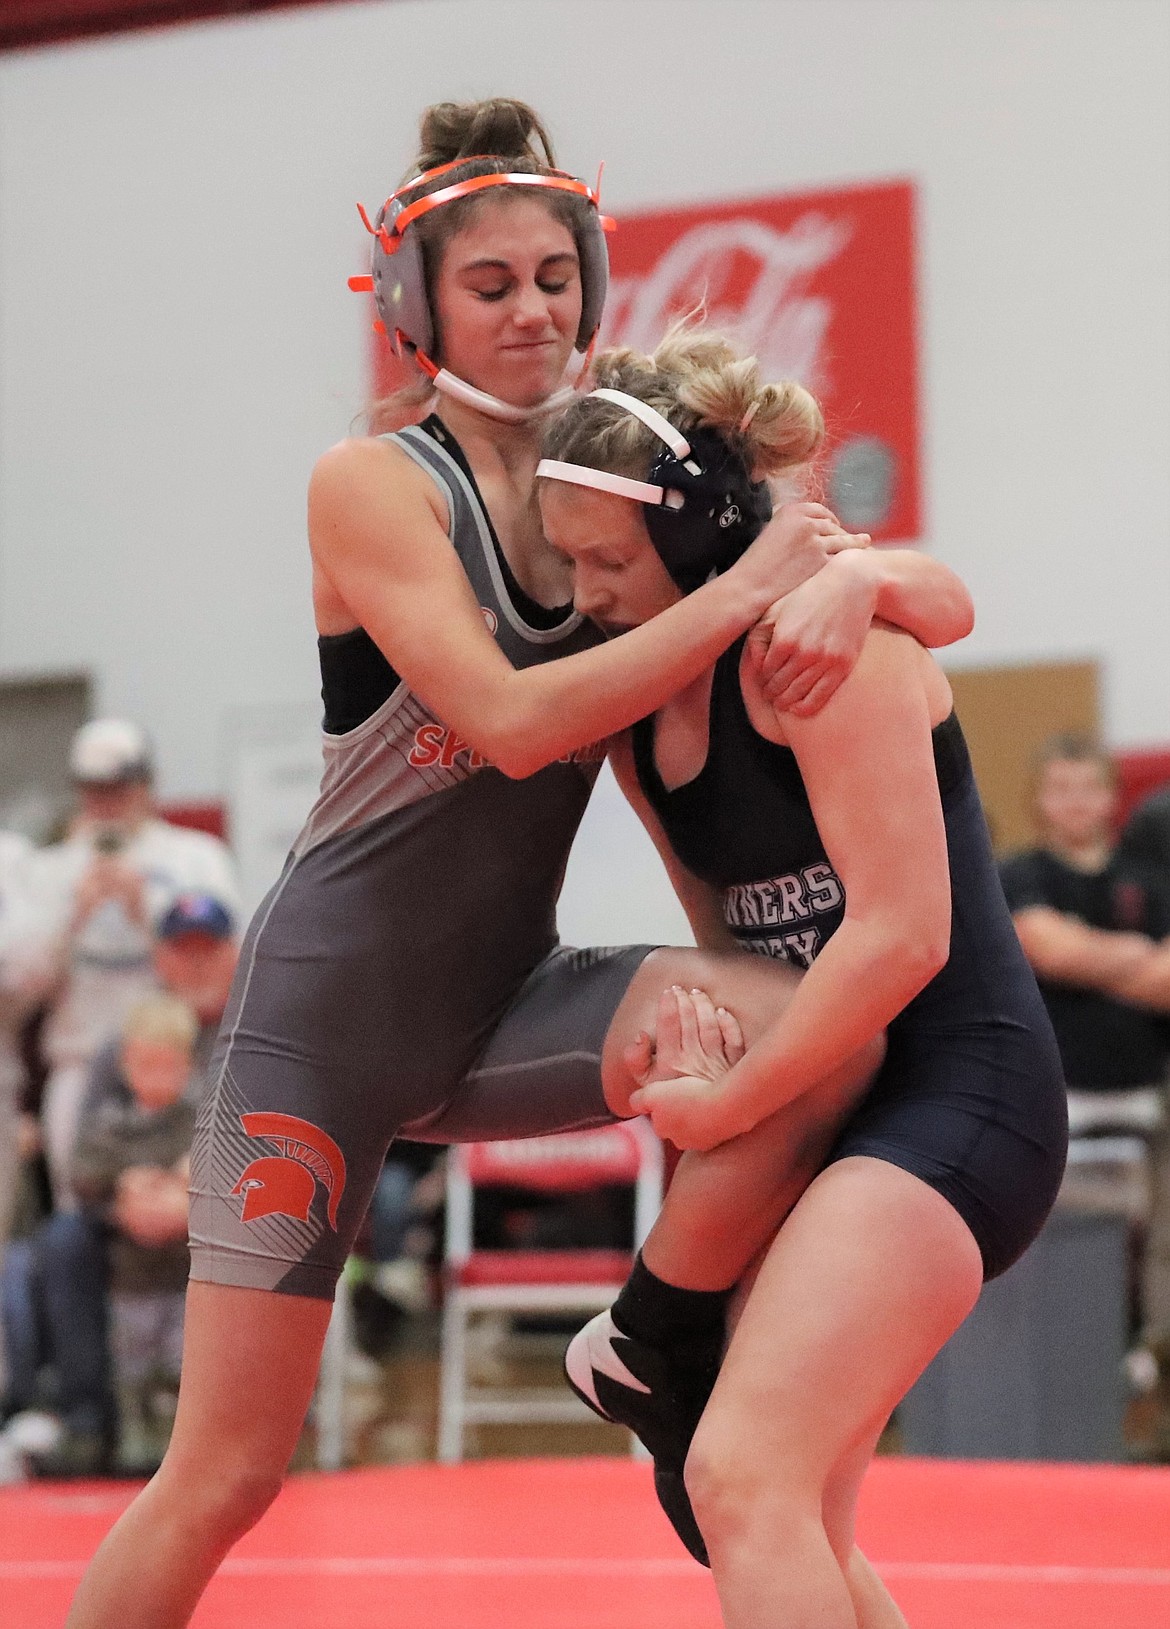 Kailee Davis (left) tries to escape the grasp of her opponent during a match Saturday at Sandpoint High.